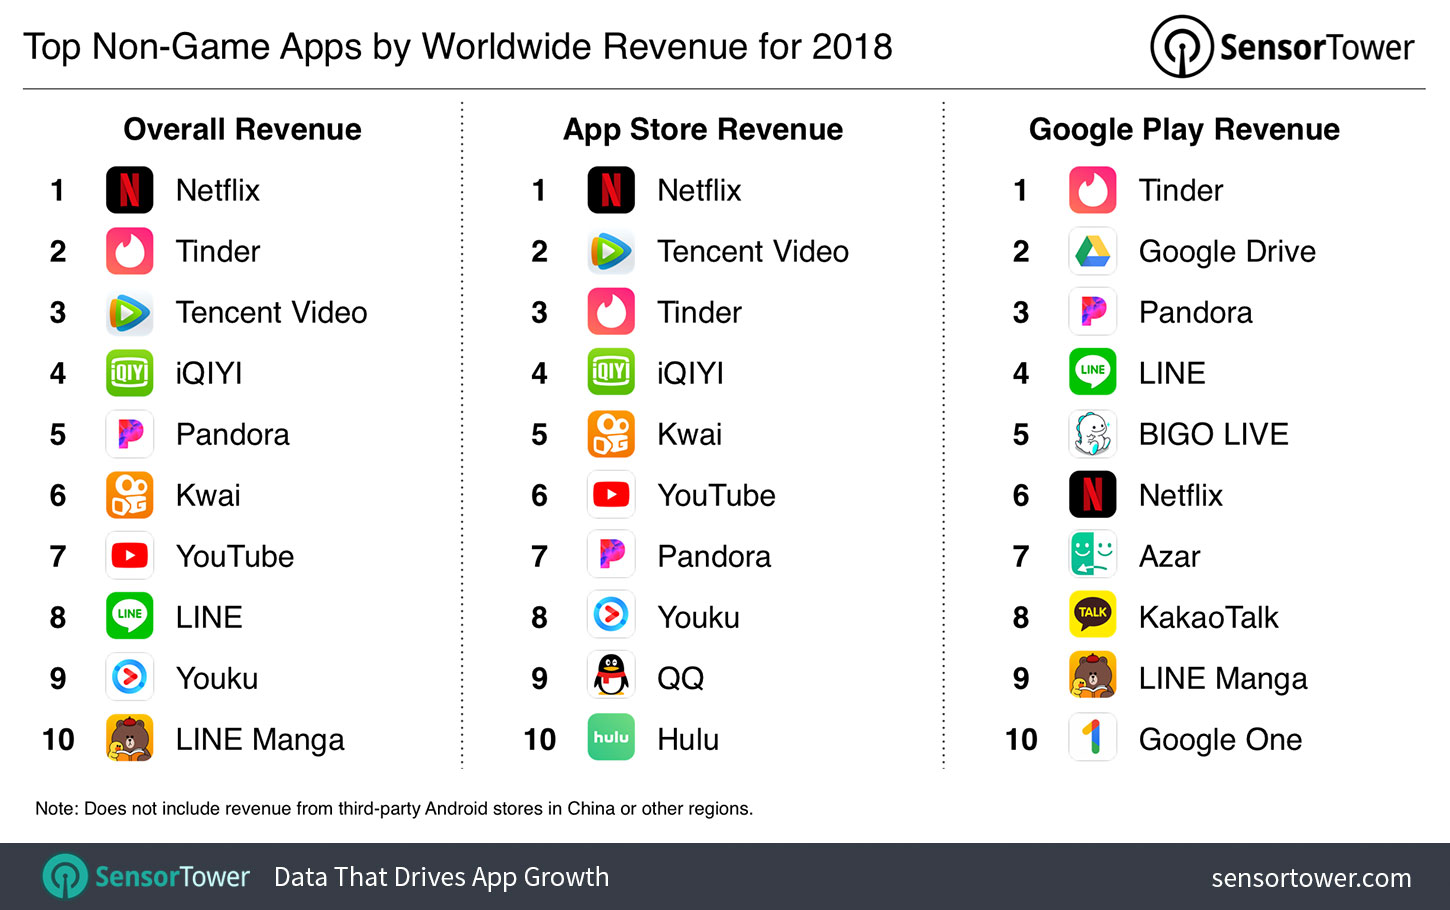 Chart showing the world's highest grossing iOS and Google Play apps for 2018